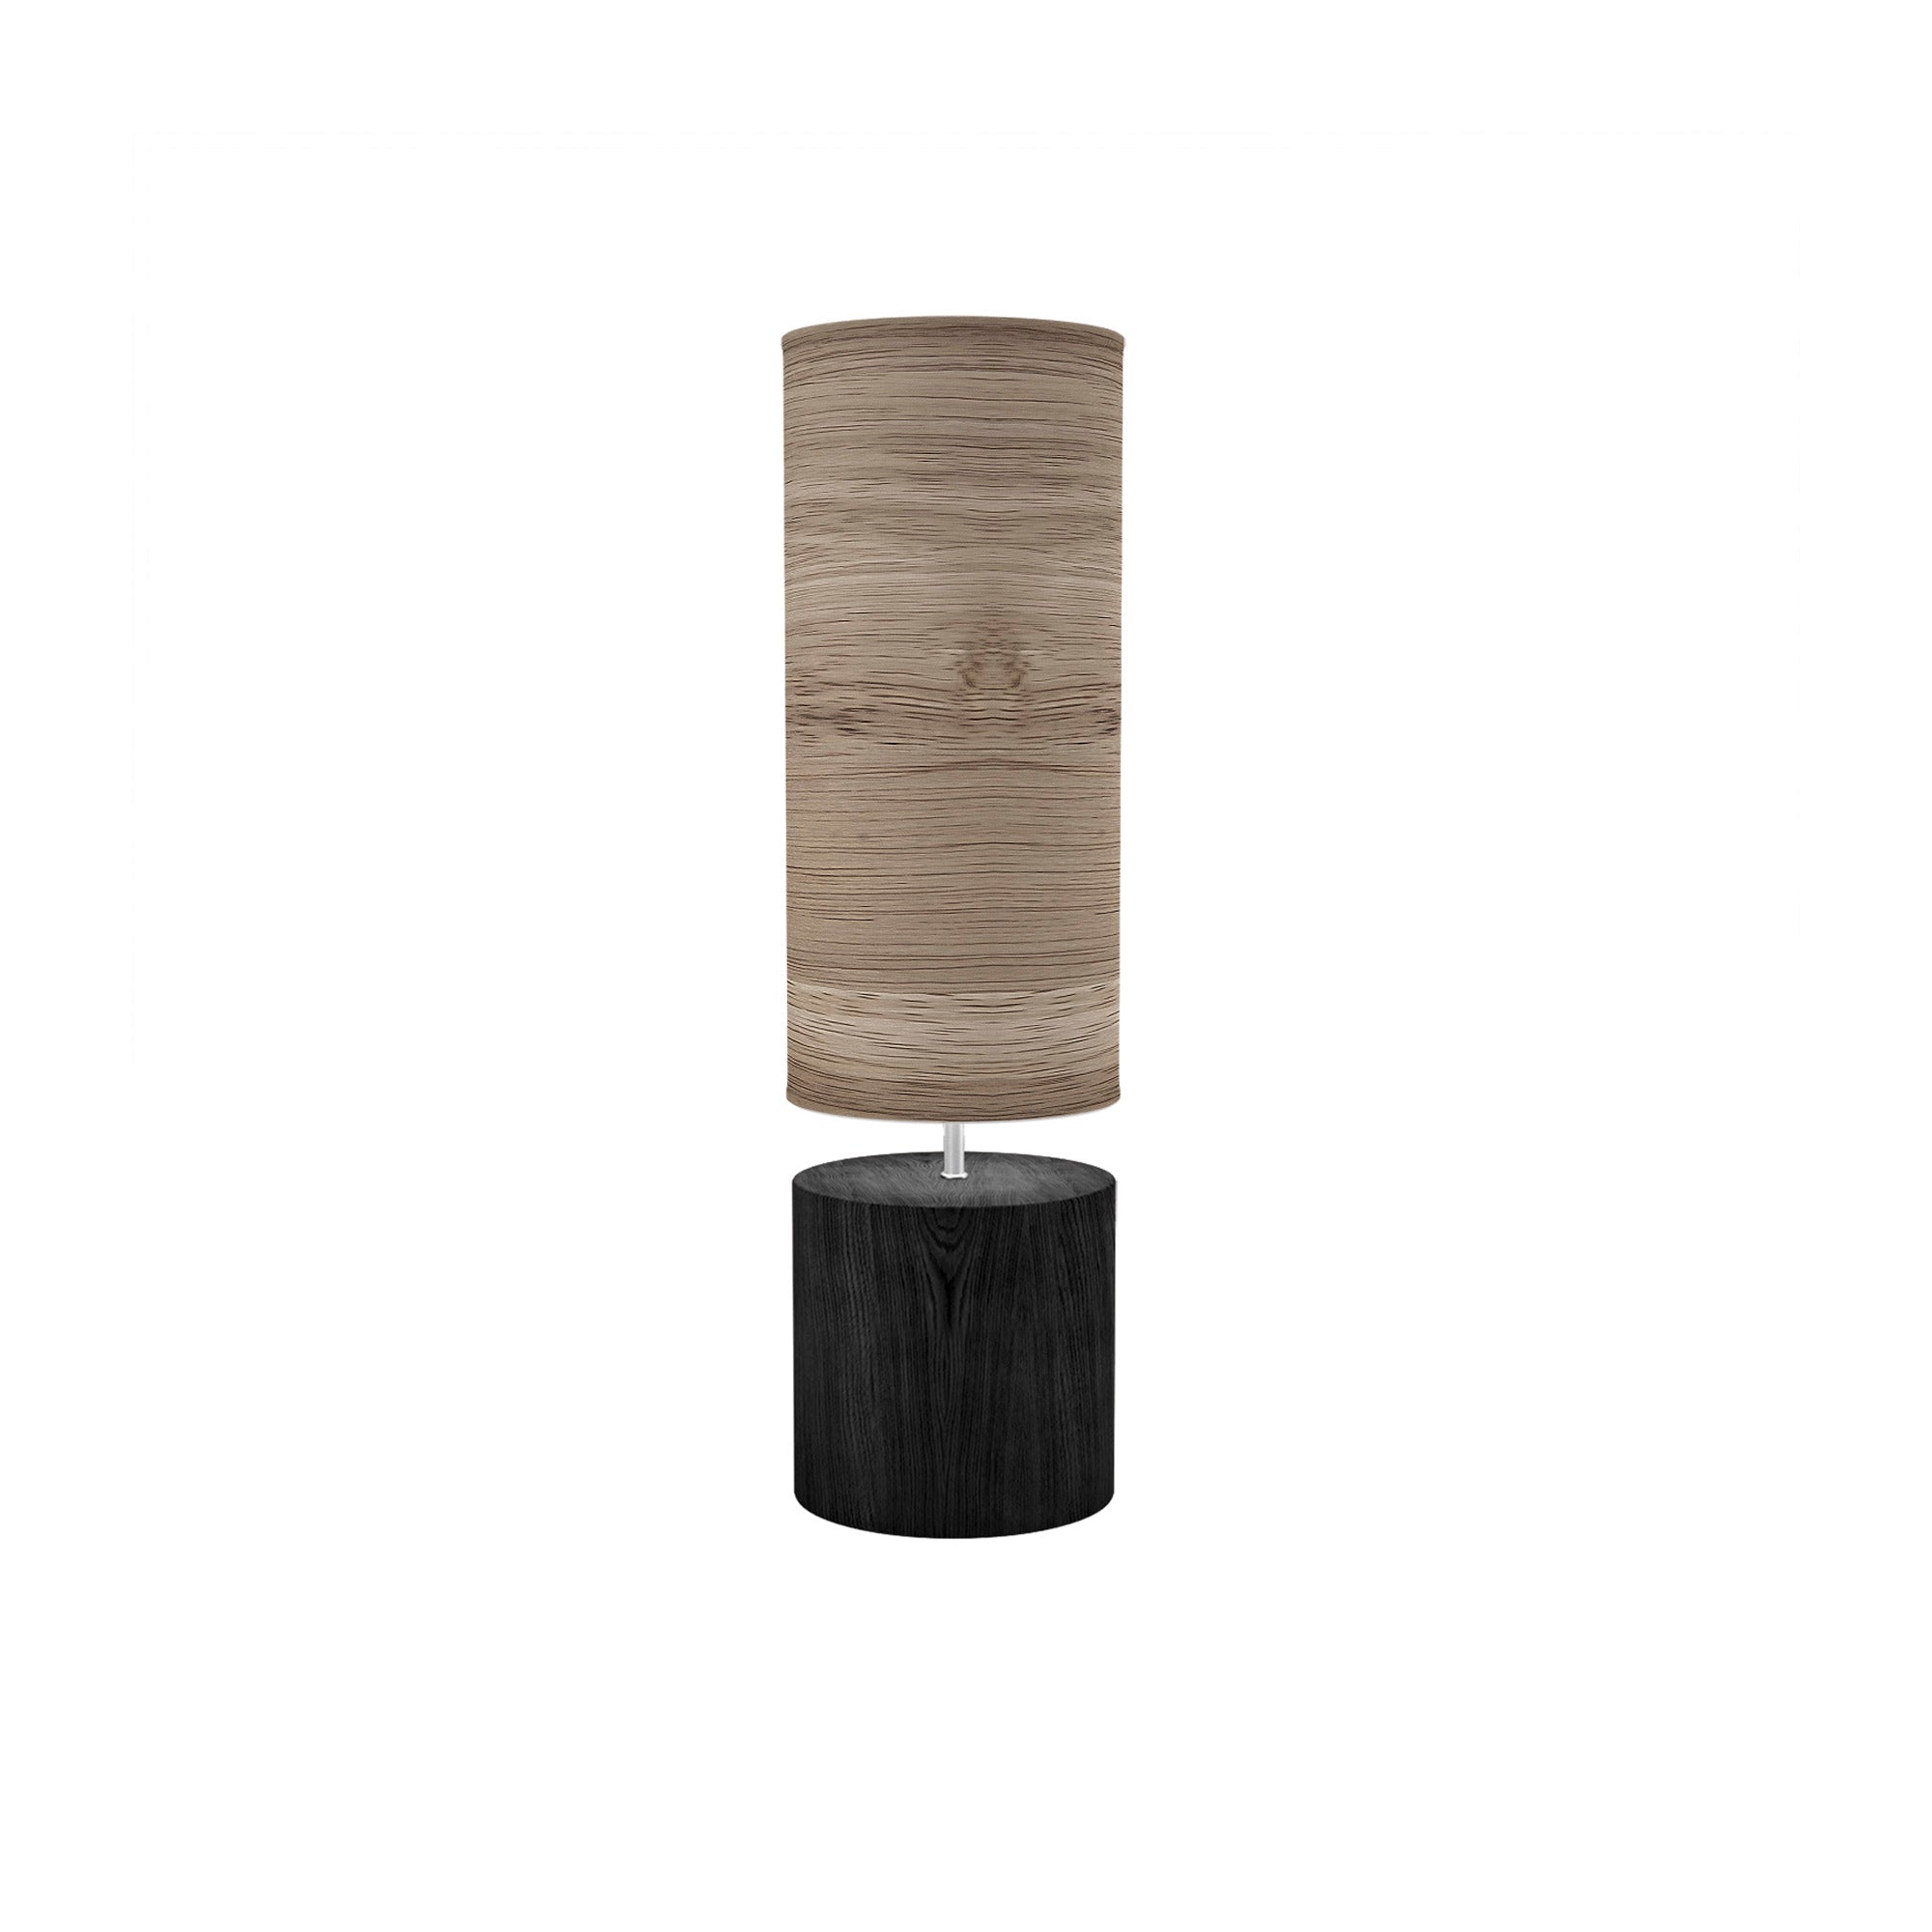 The Laurie Table Lamp from Seascape Fixtures with the ebony base with a photo veneer shade in natural color.